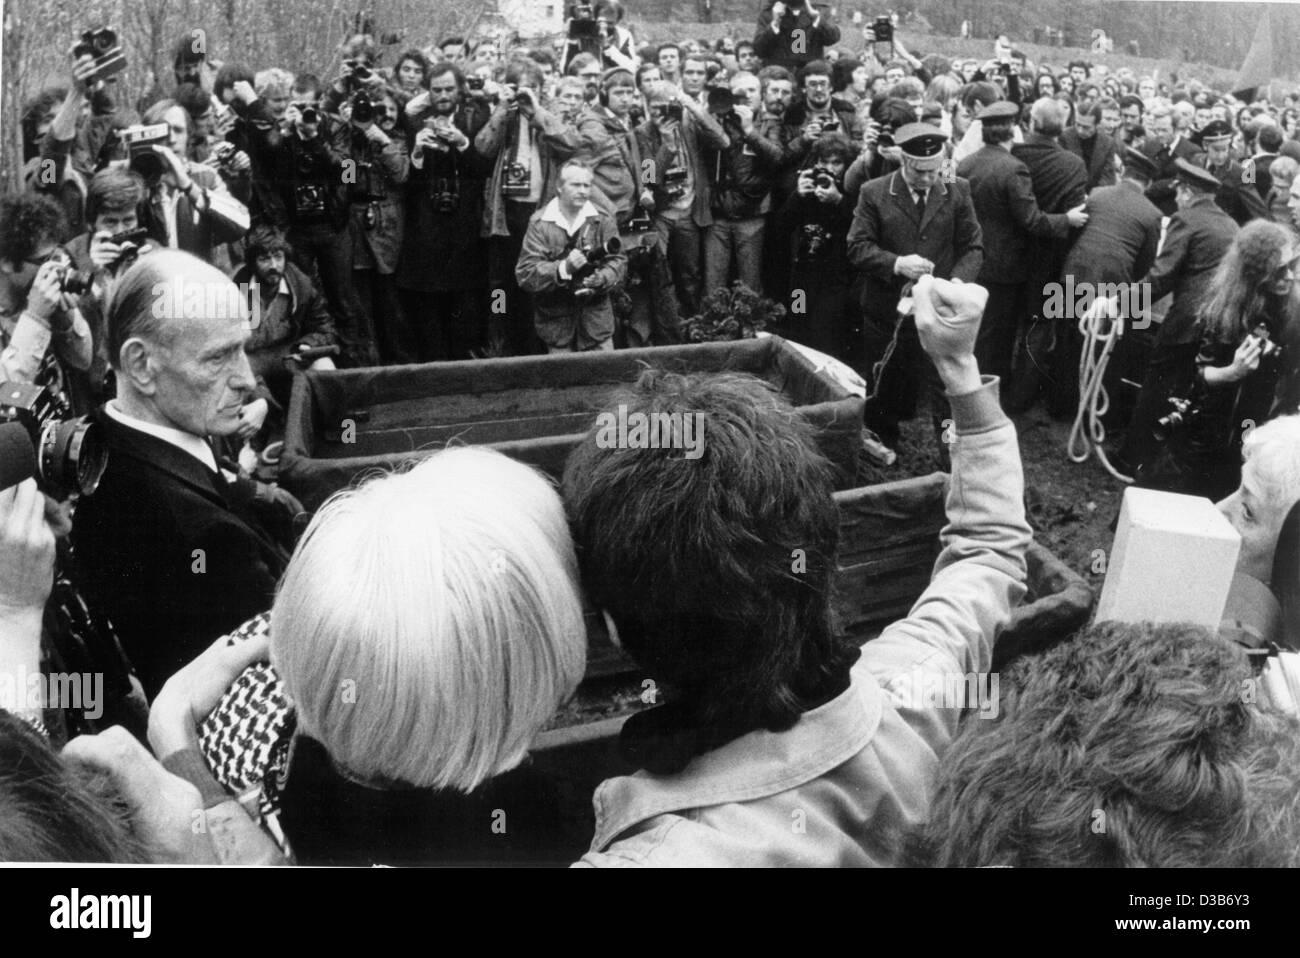 (dpa files) - A mourner shows his fist at the funeral of RAF terrorists Gudrun Ensslin, Andreas Baader and Jan Carl Raspe at the Dornfelden cemetery in Stuttgart, 27 October 1977. On the left is Priest Helmut Ensslin, the father of Gudrun Ensslin. Raspe was tried with Ulrike Meinhof, Andreas Baader, Stock Photo